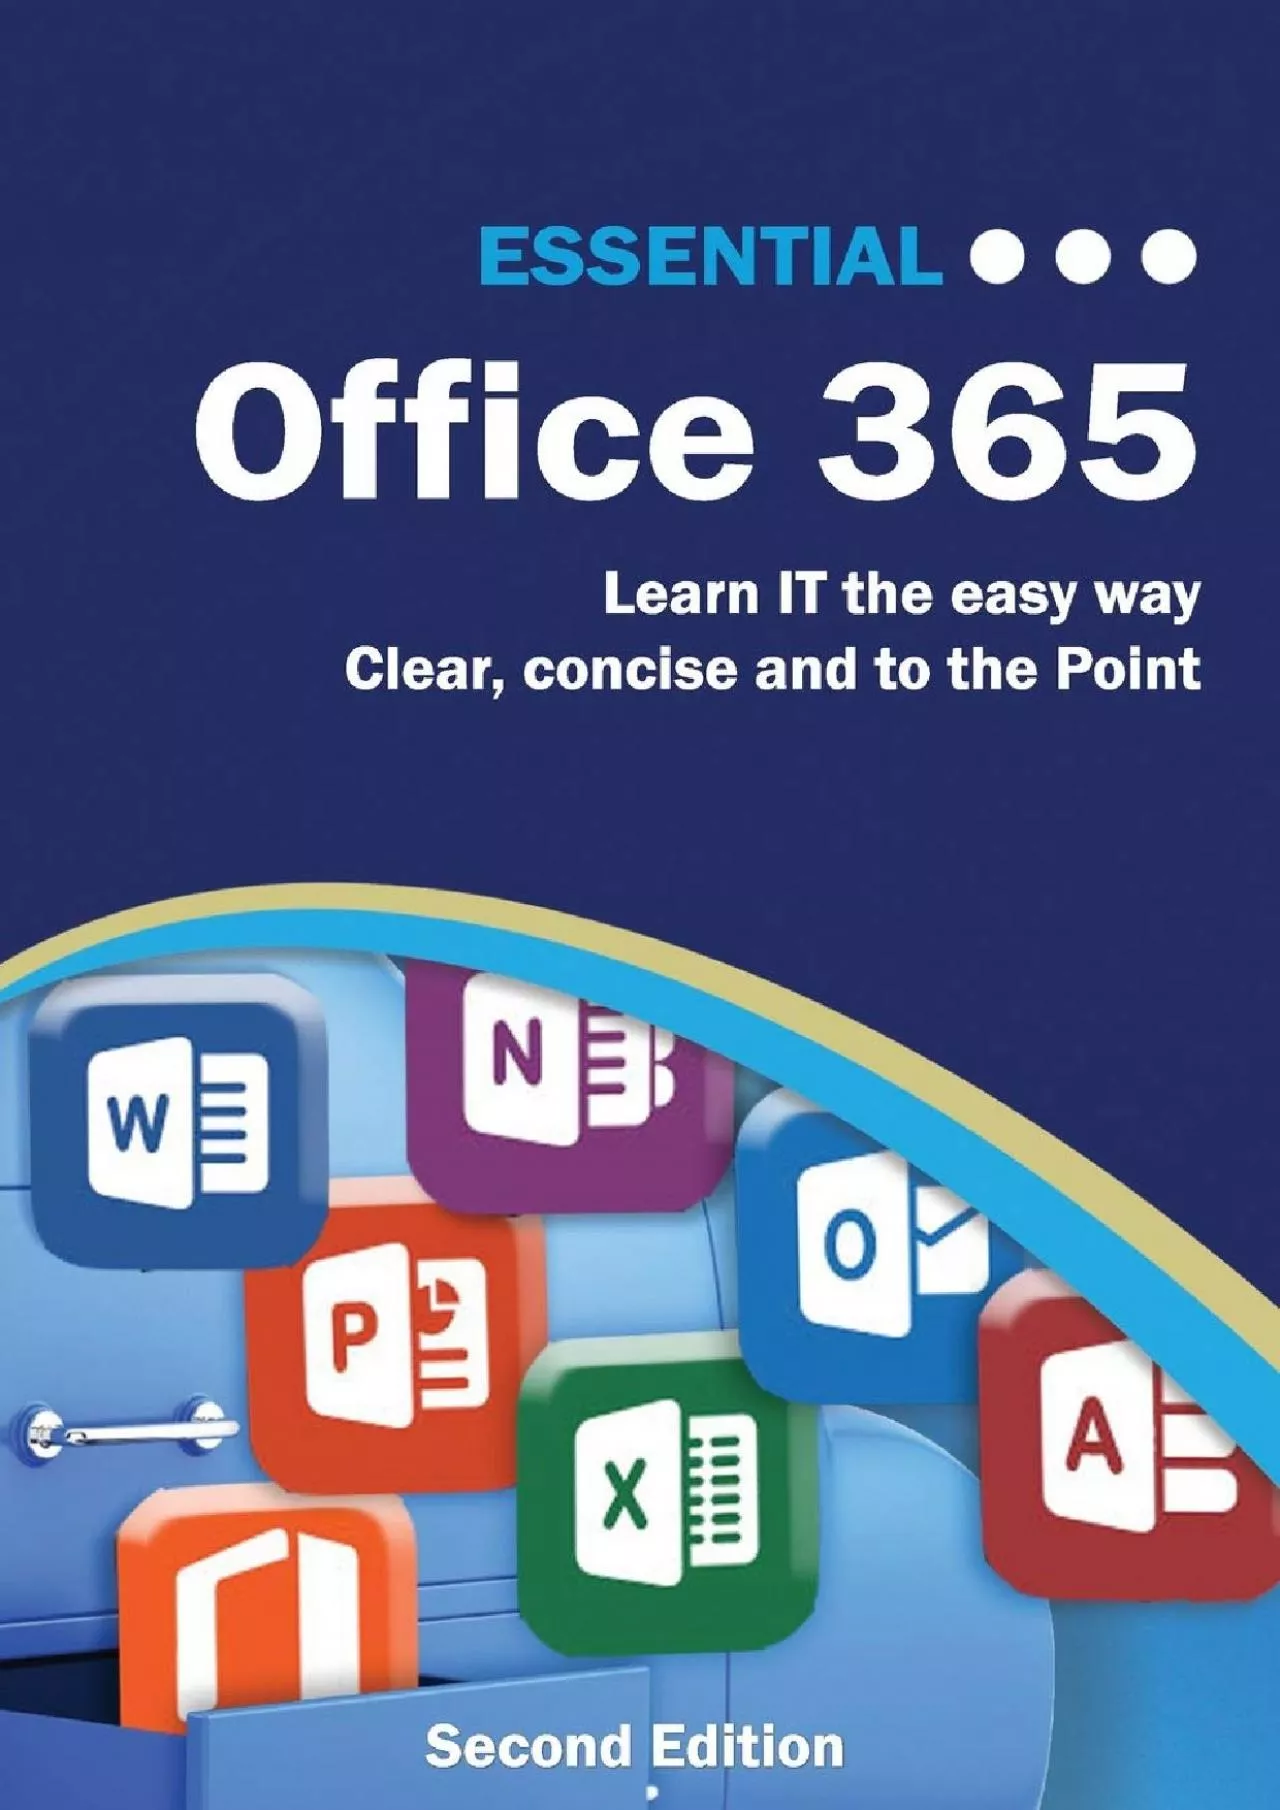 (DOWNLOAD)-Essential Office 365 Second Edition: The Illustrated Guide to Using Microsoft